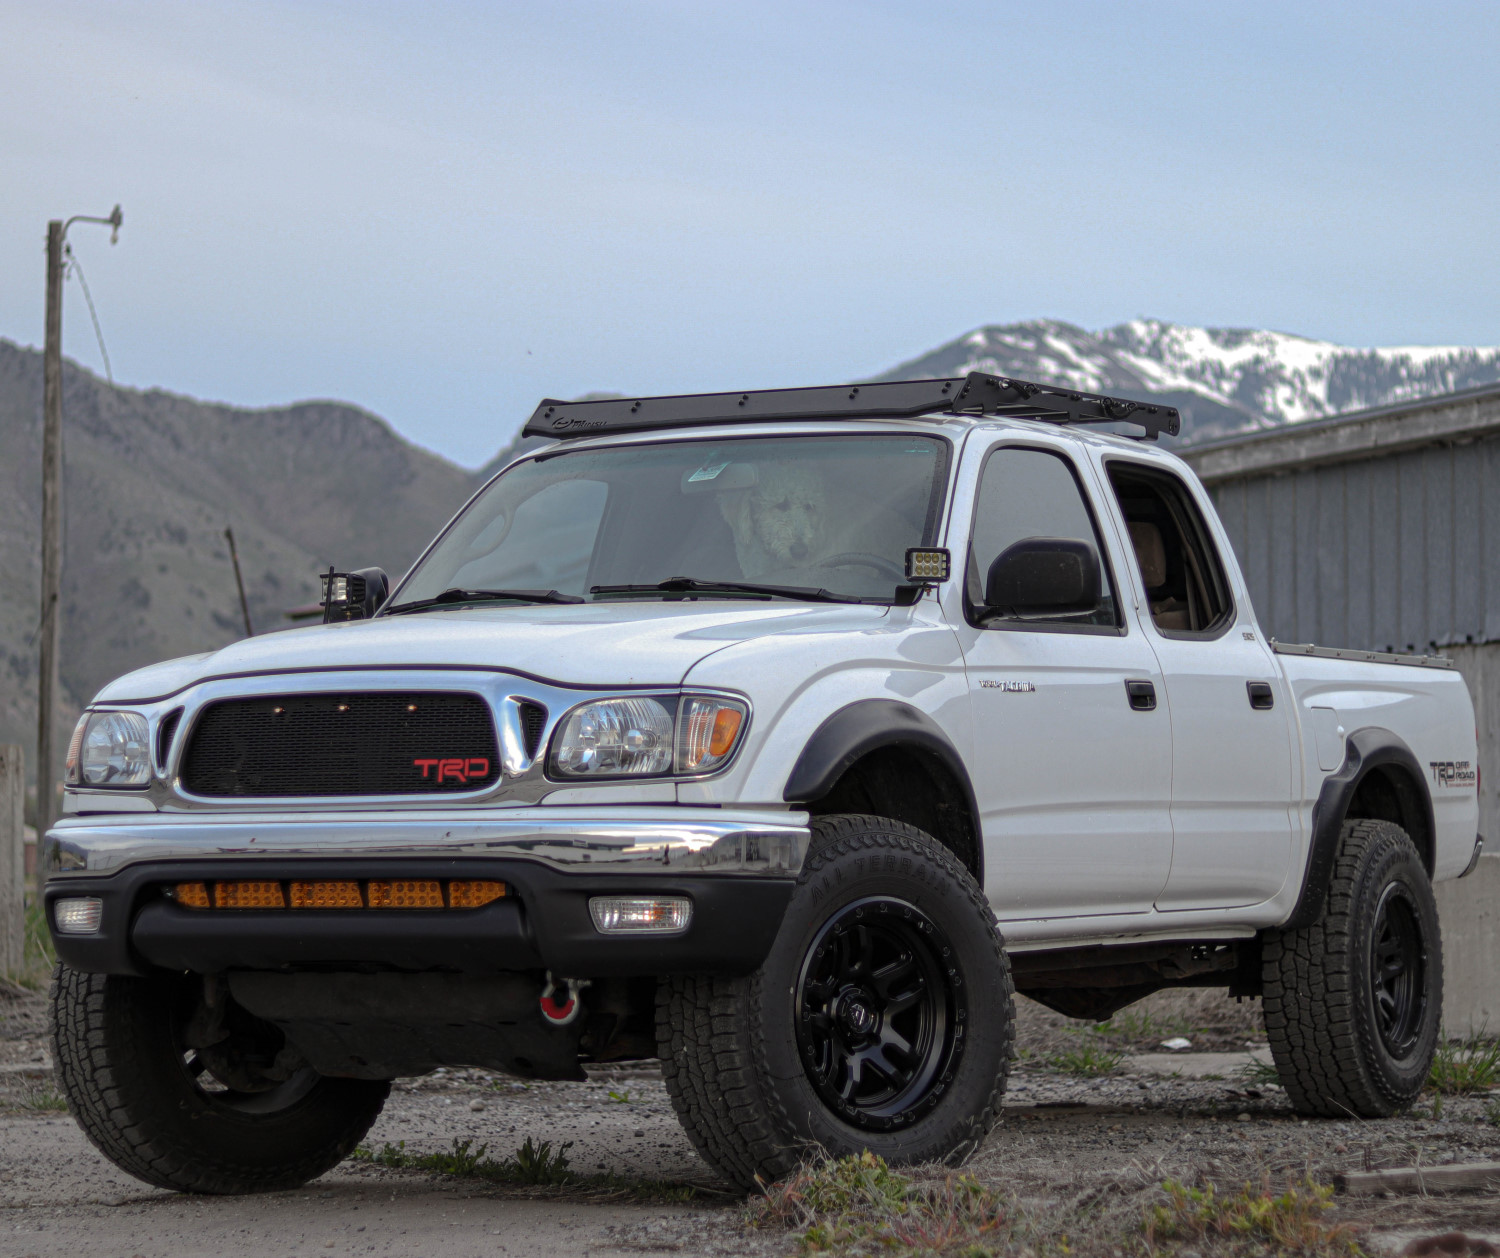 White Toyota Tacoma: Conquering the Mountains